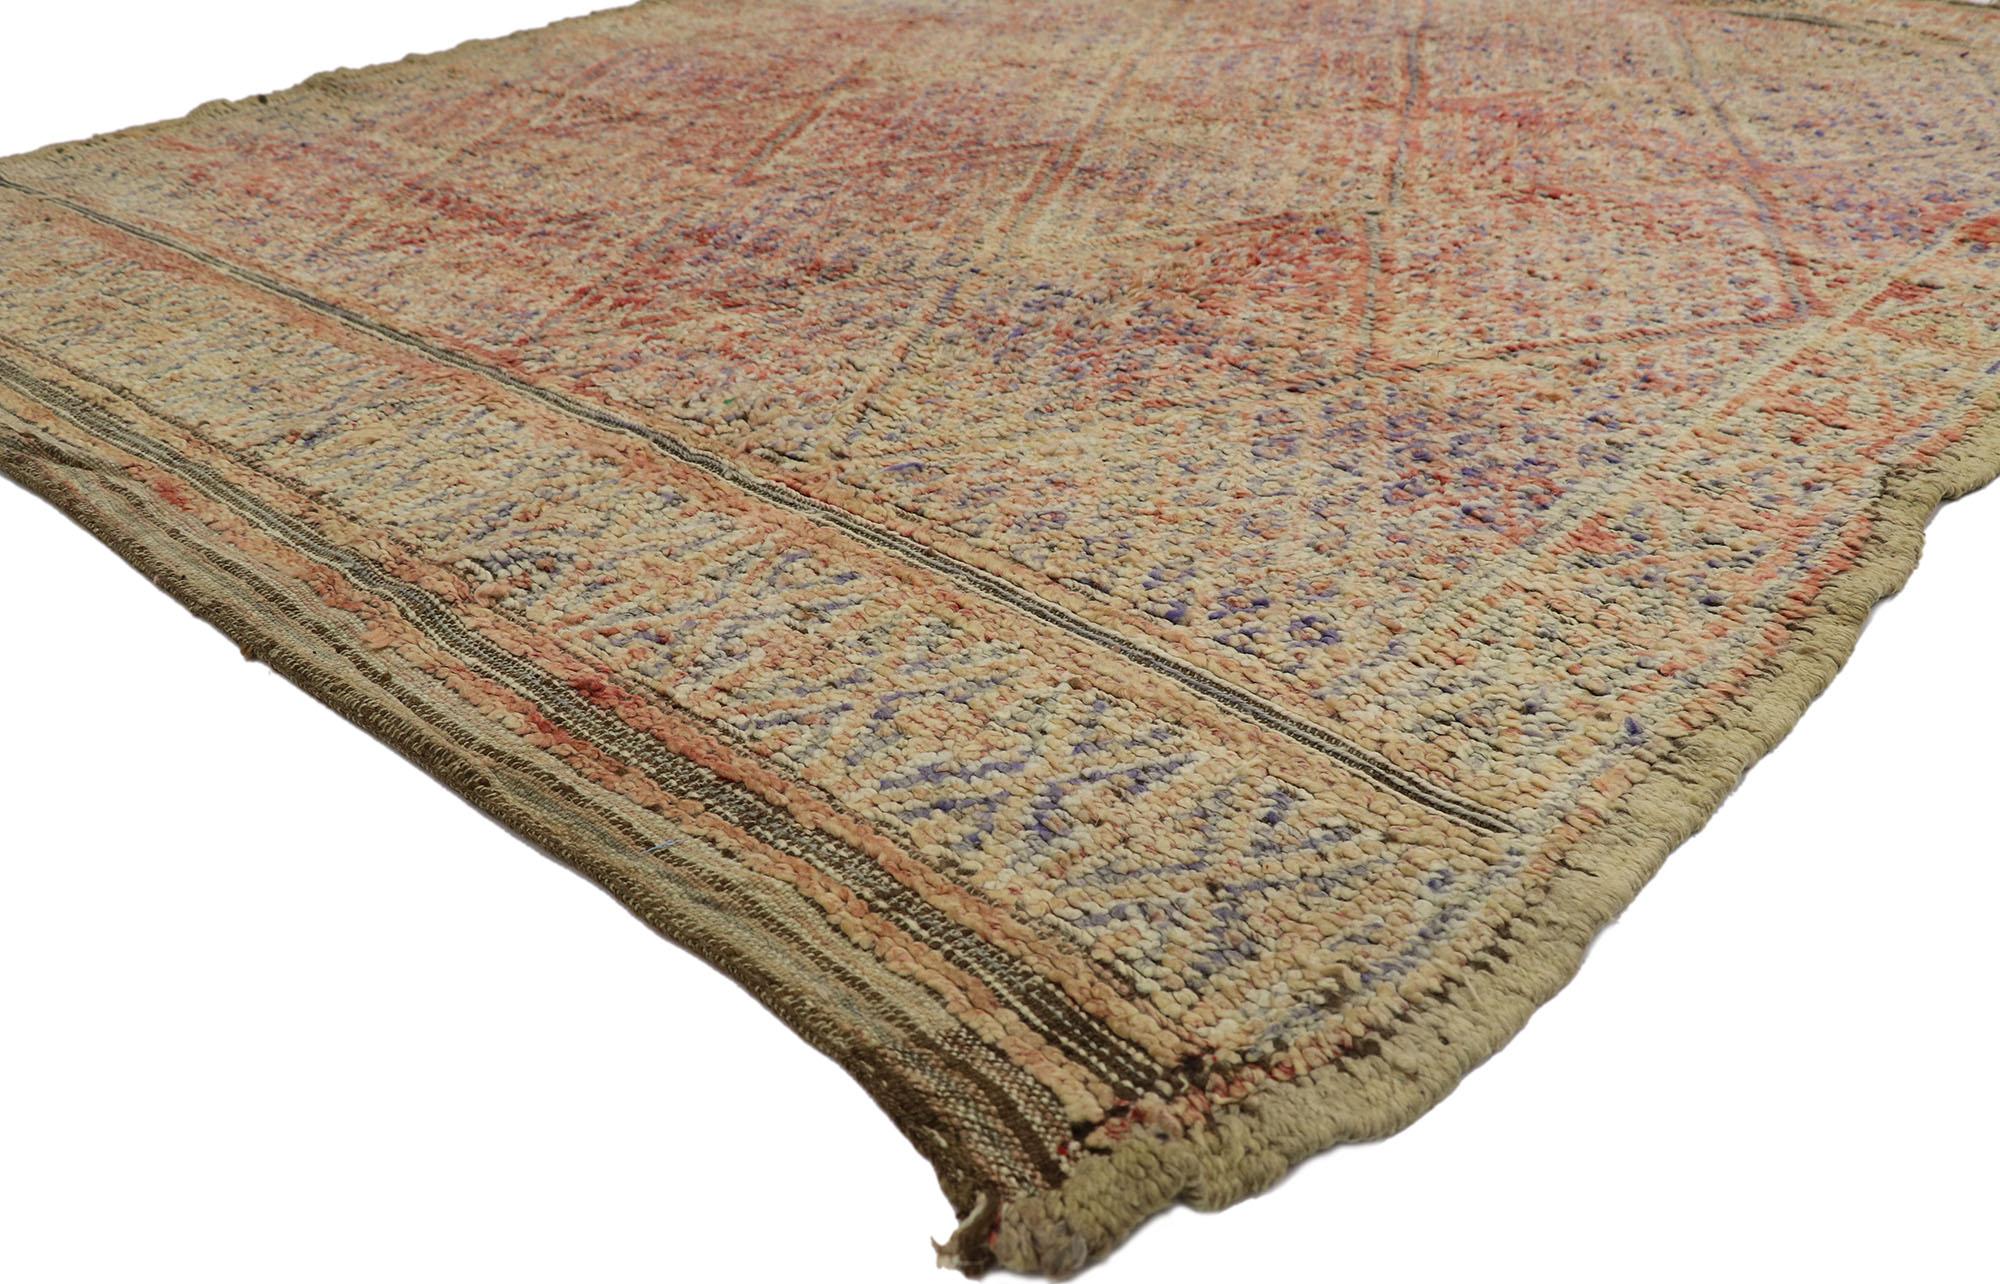 21446 Vintage Beni MGuild Moroccan Rug, 06'09 x 08'05. Originating from the Beni M'Guild tribe nestled in Morocco's Middle Atlas Mountains, Beni M'Guild rugs embody a cherished tradition meticulously handcrafted by skilled Berber women. These rugs